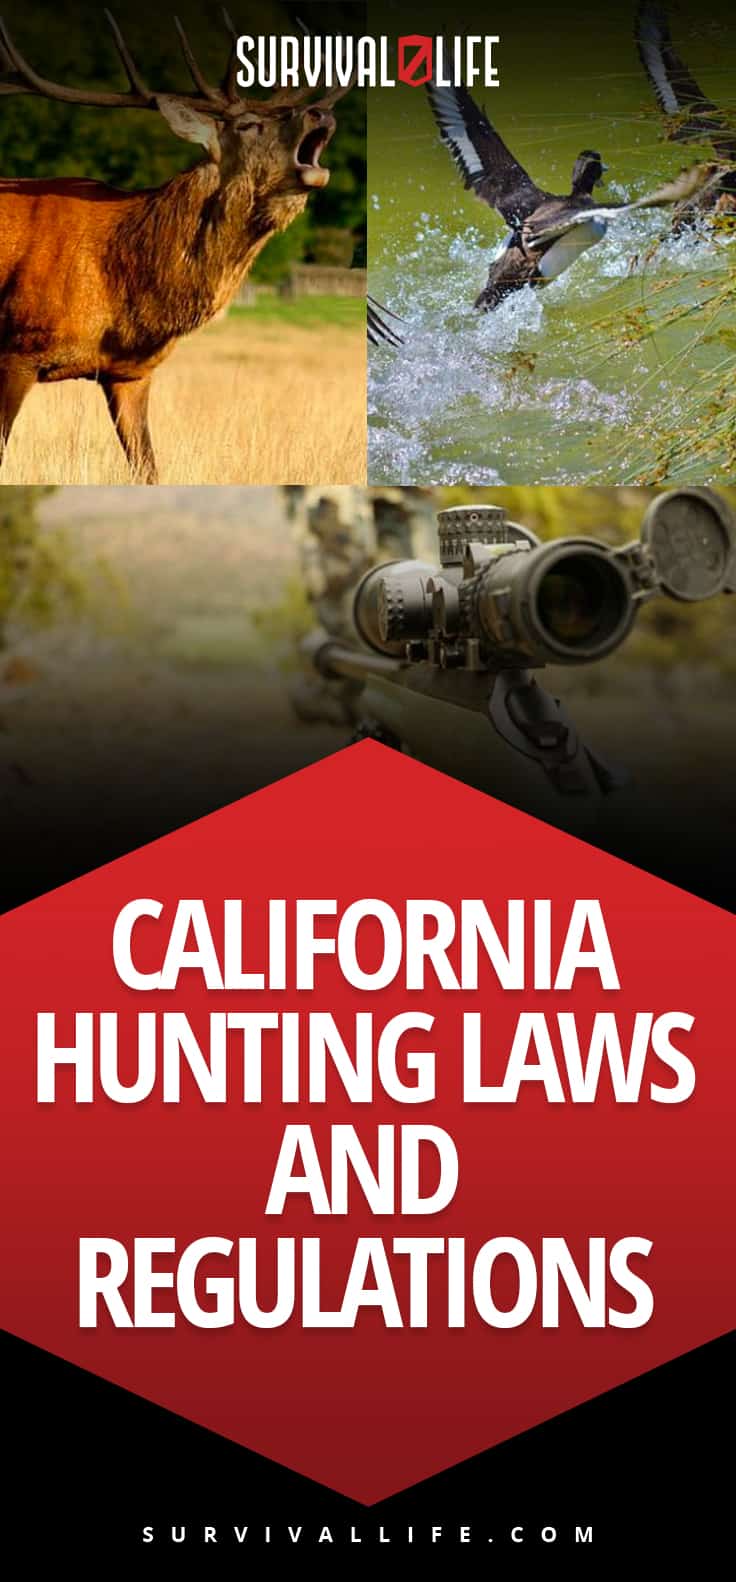 California Hunting Laws and Regulations